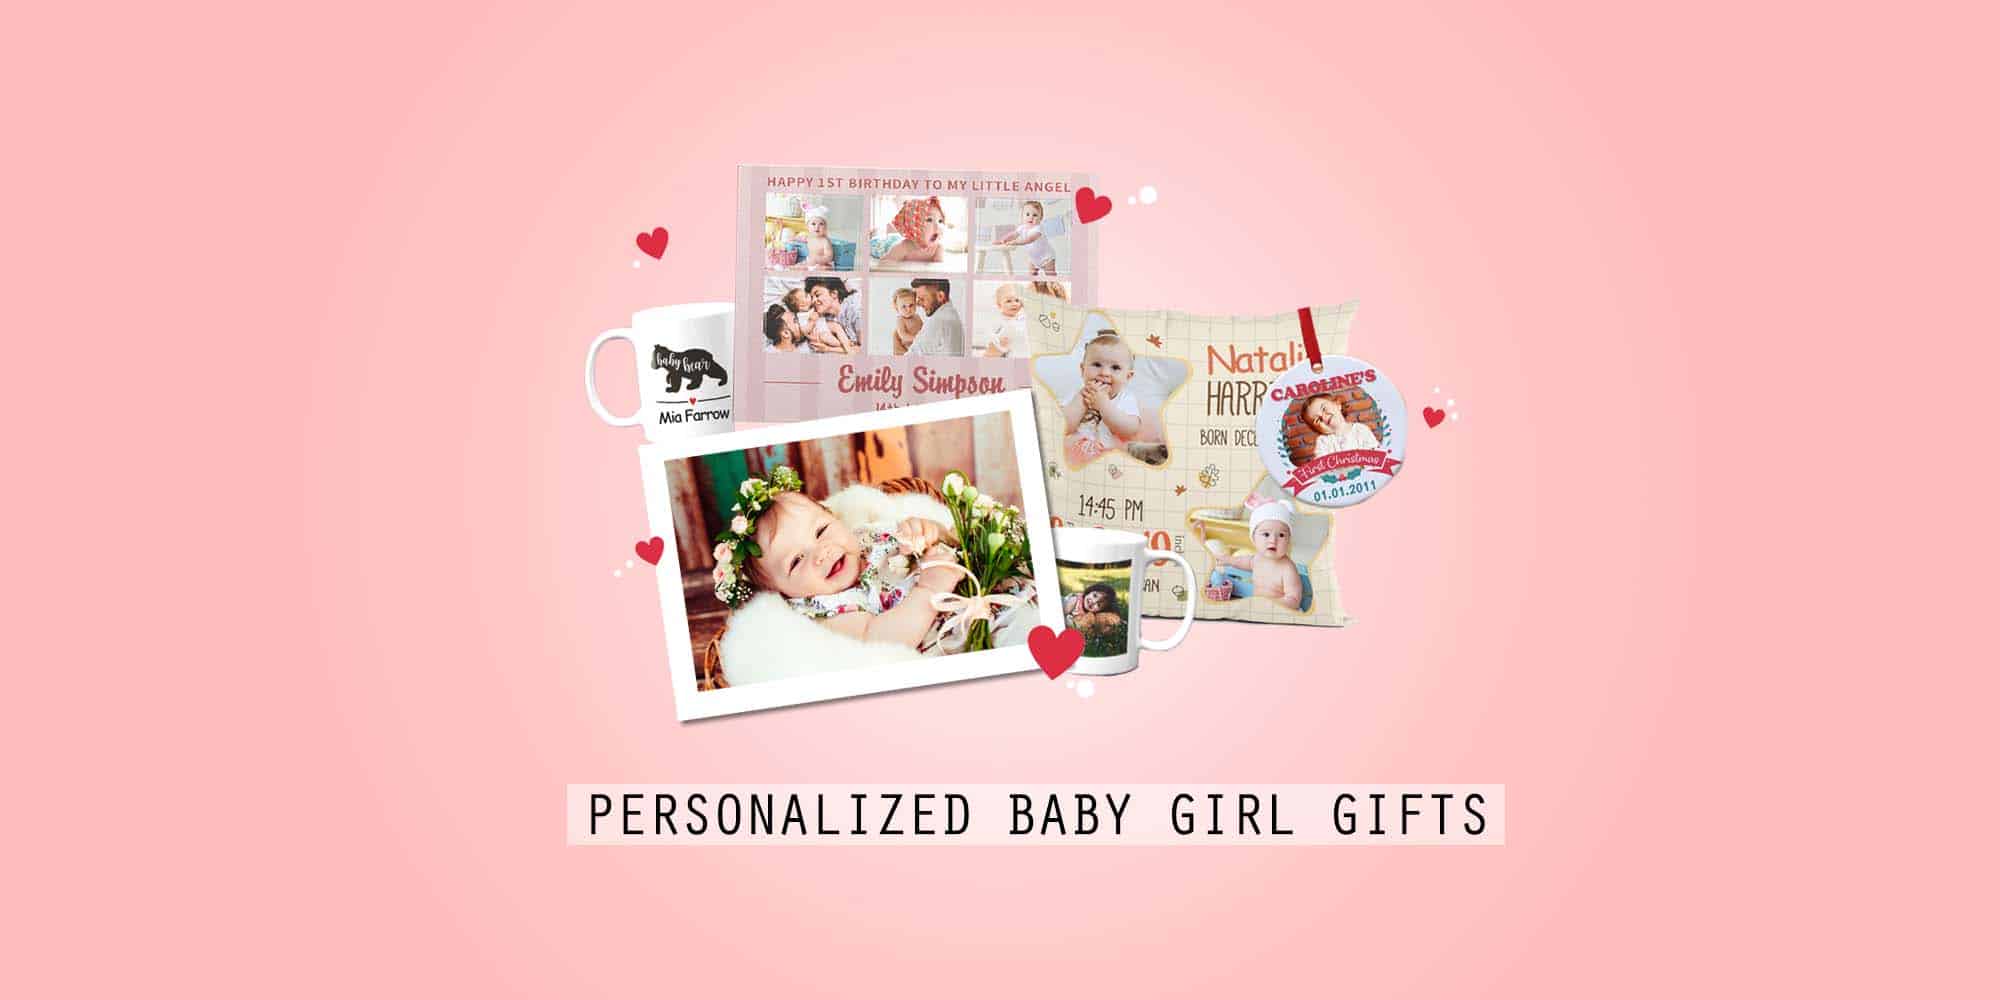 25 Personalized Gifts for Baby Girls (2021 Guide)